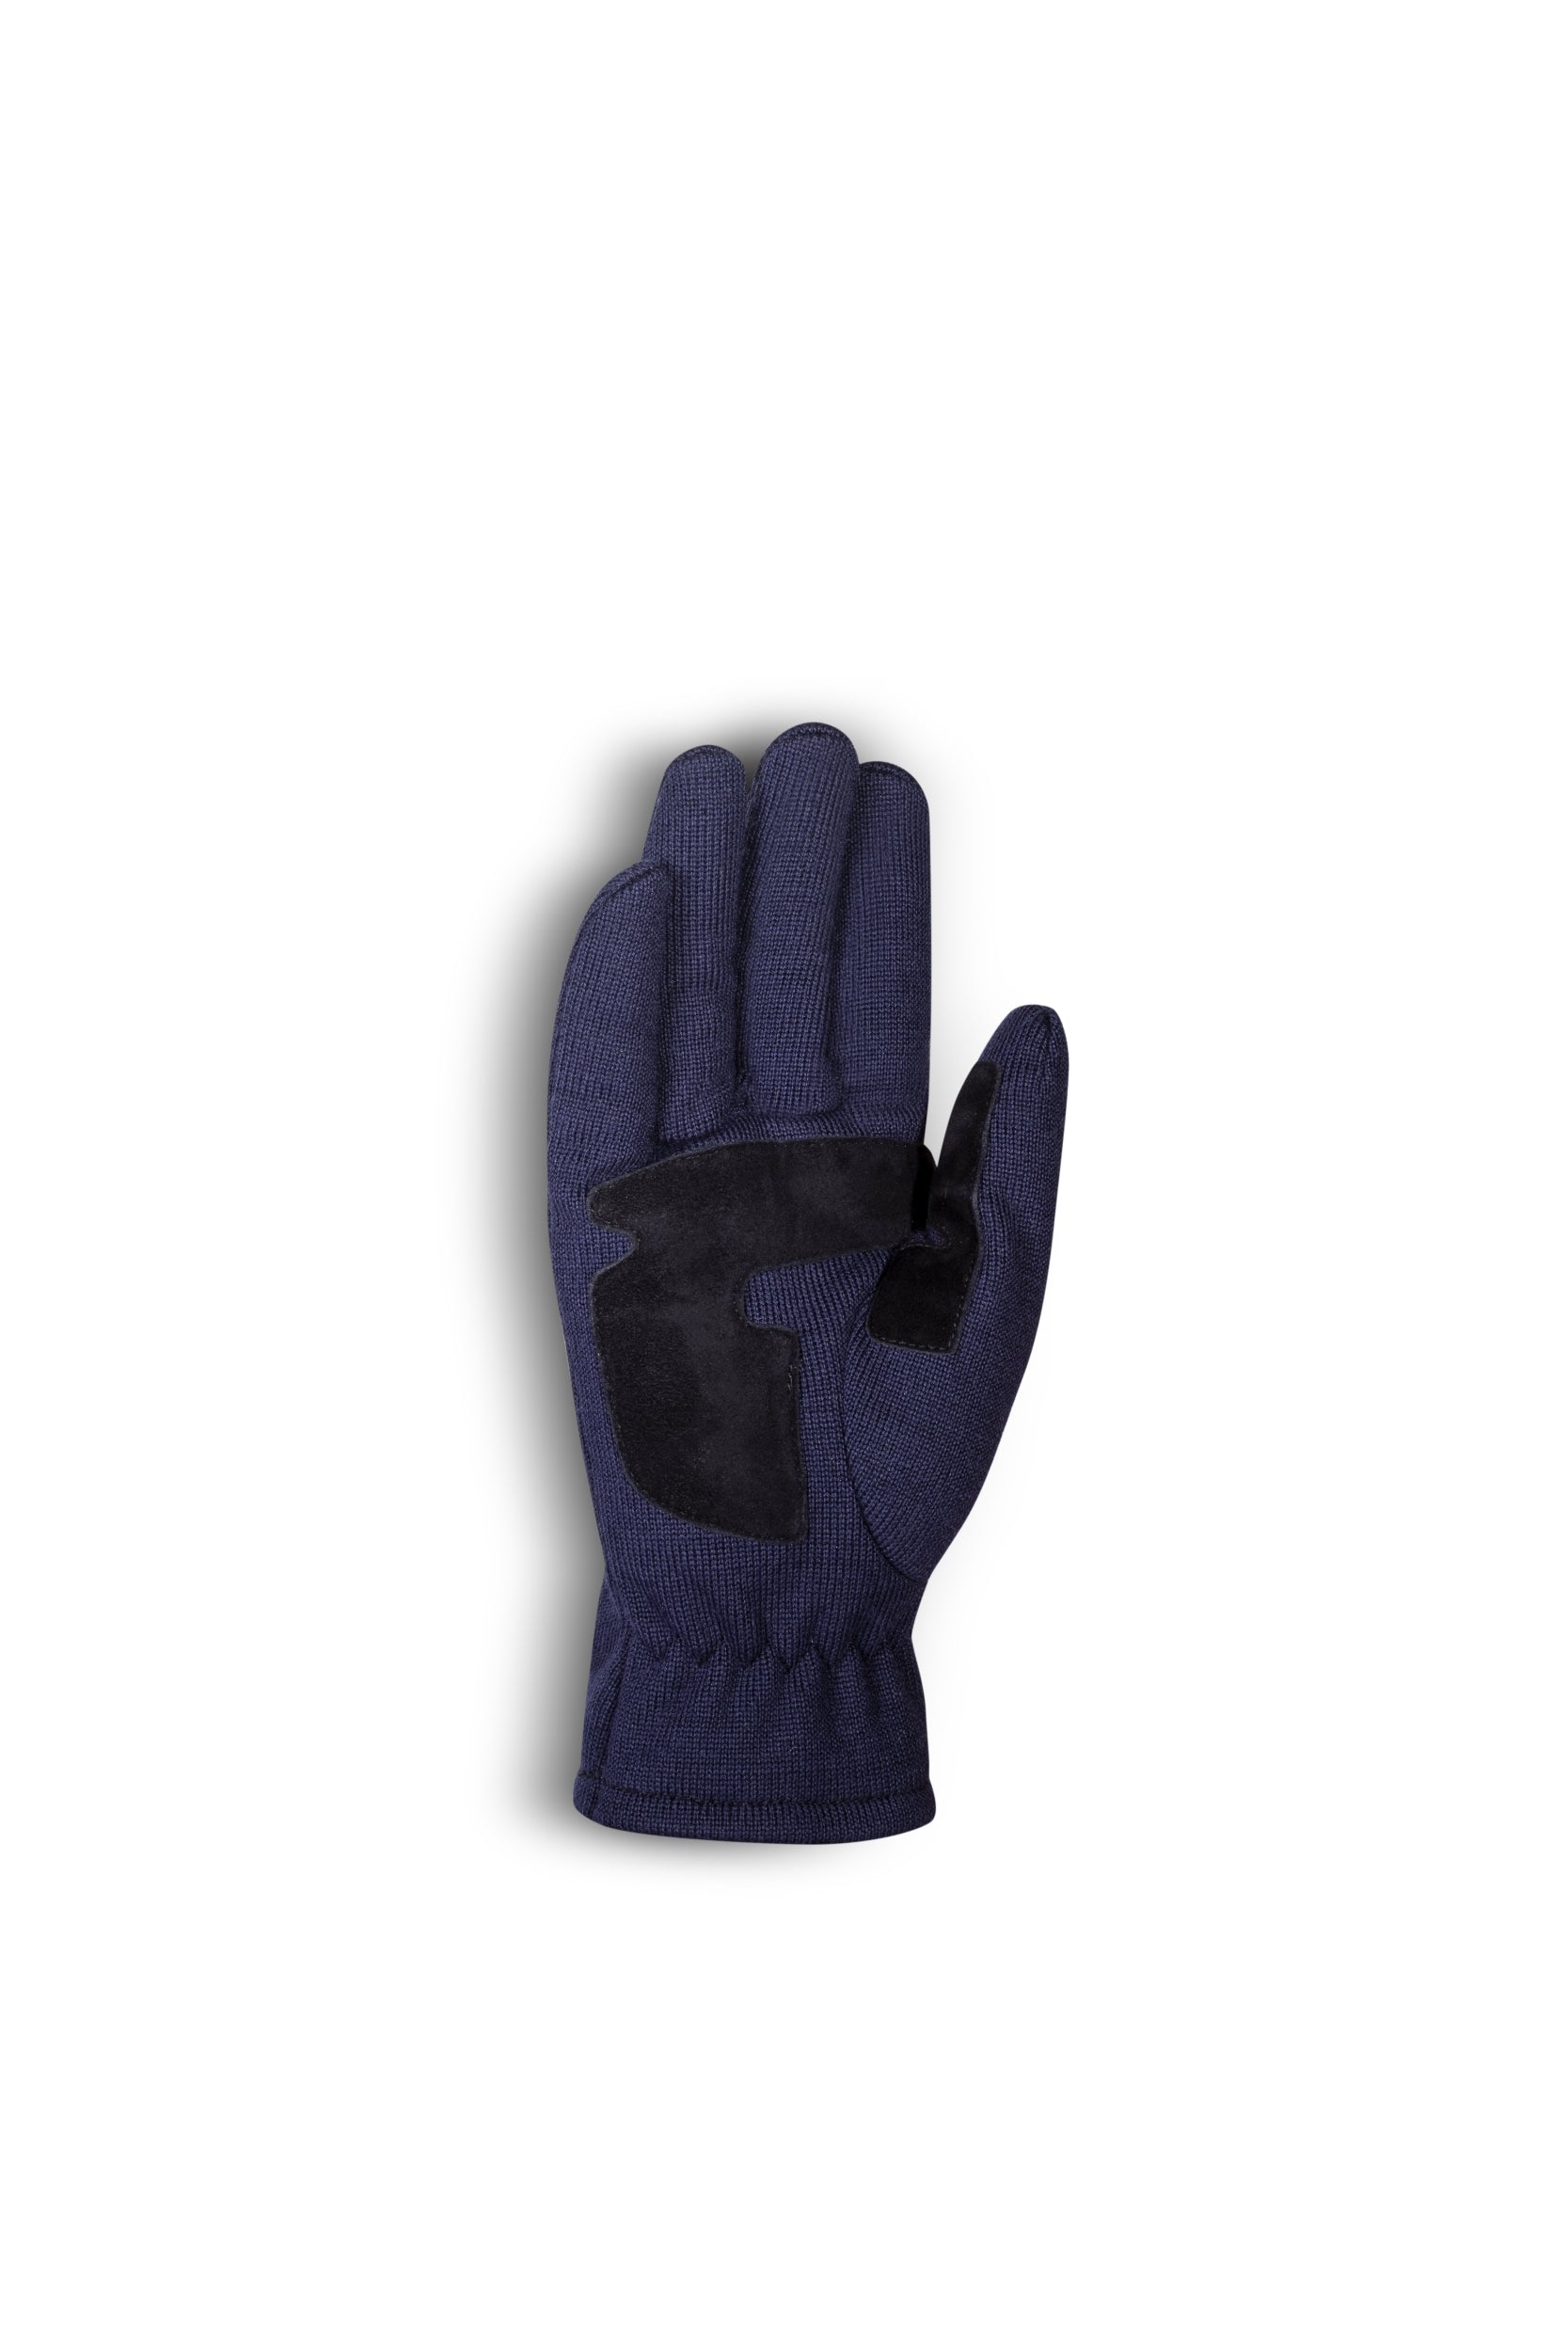 SPARCO 00208210BM NEW WOOL SPORTDRIVE Gloves, navy blue, size 10 Photo-1 